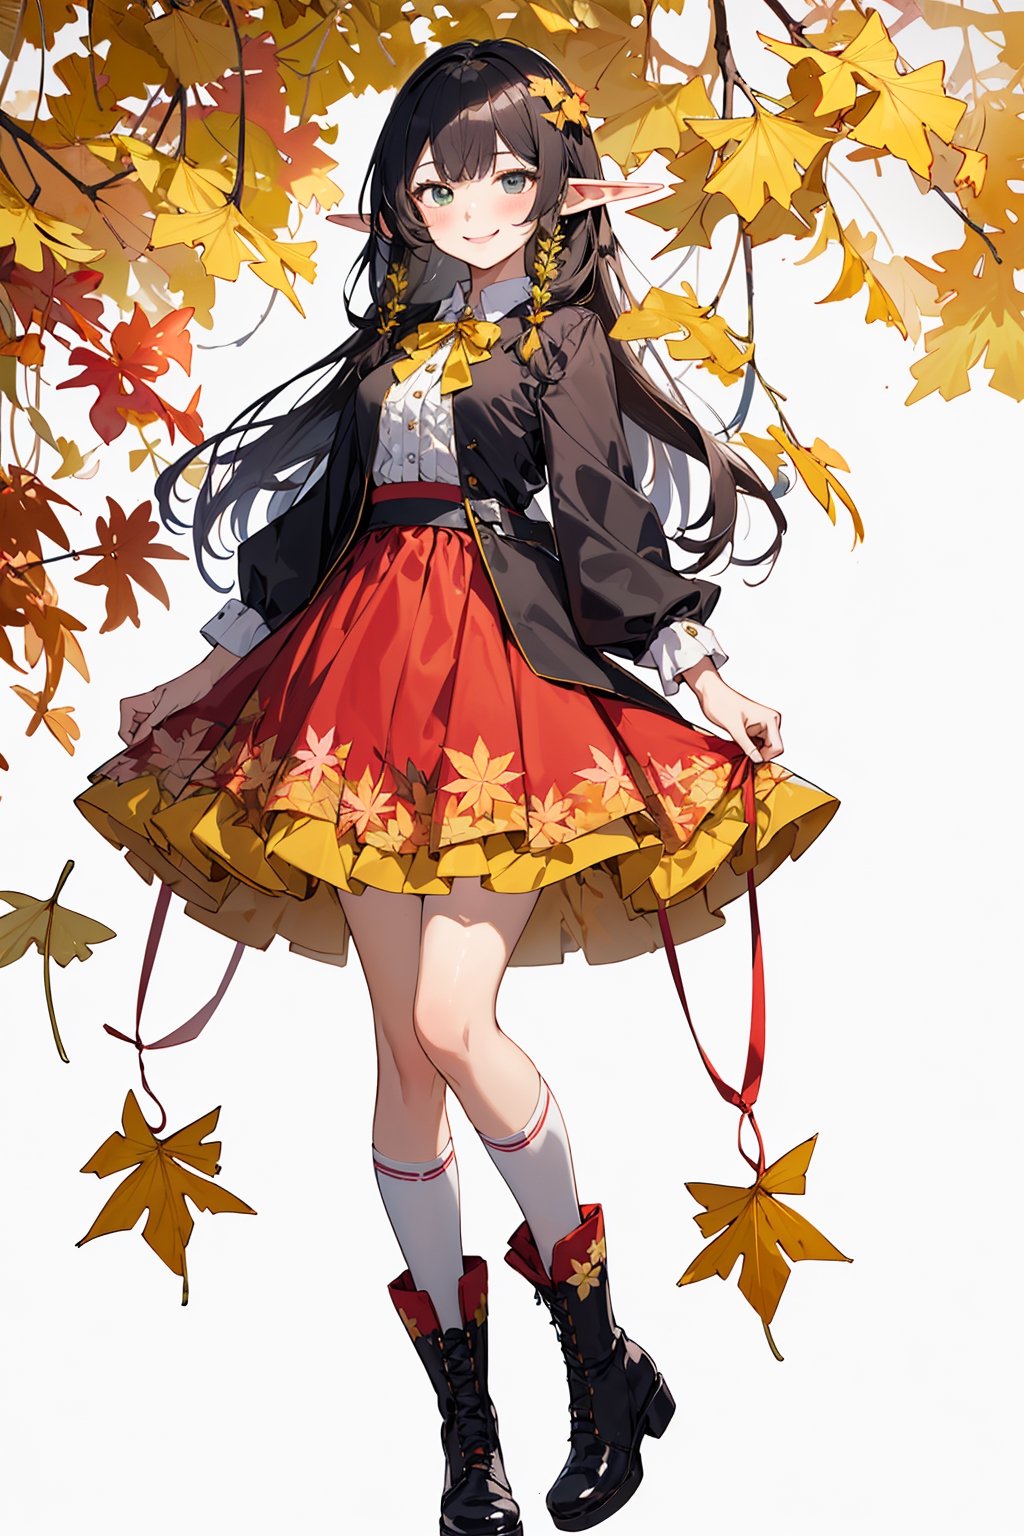 ((Botanical art white background)), 1 girl, cchubby, super long hair, blouse, skirt, frilly socks, ribbon, boots, elf, smile, autumn, lots of maple leaves and ginkgo trees with red leaves,